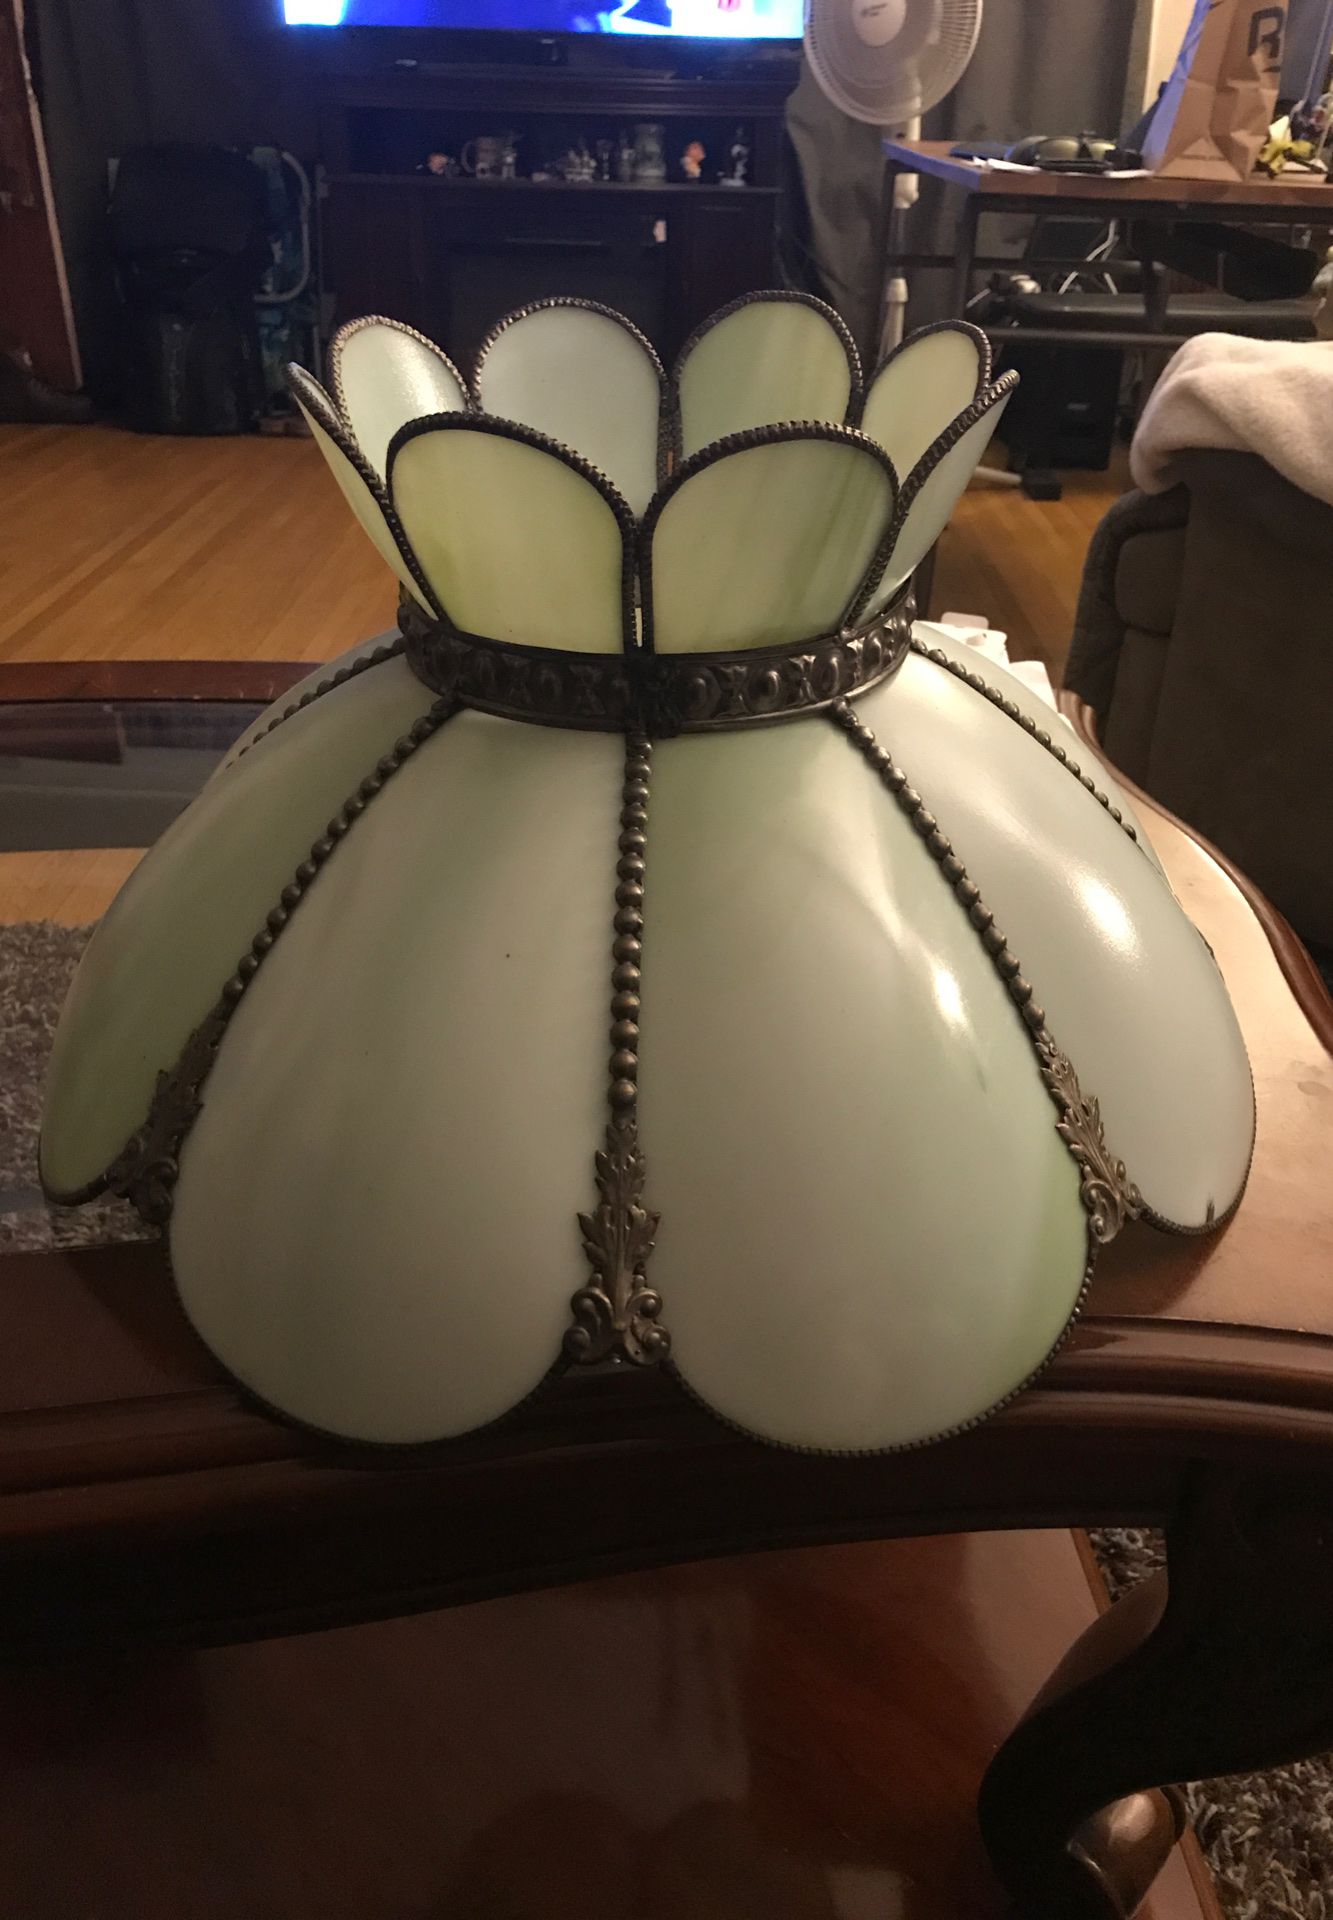 Glass Lamp Shade - Mint Green and White